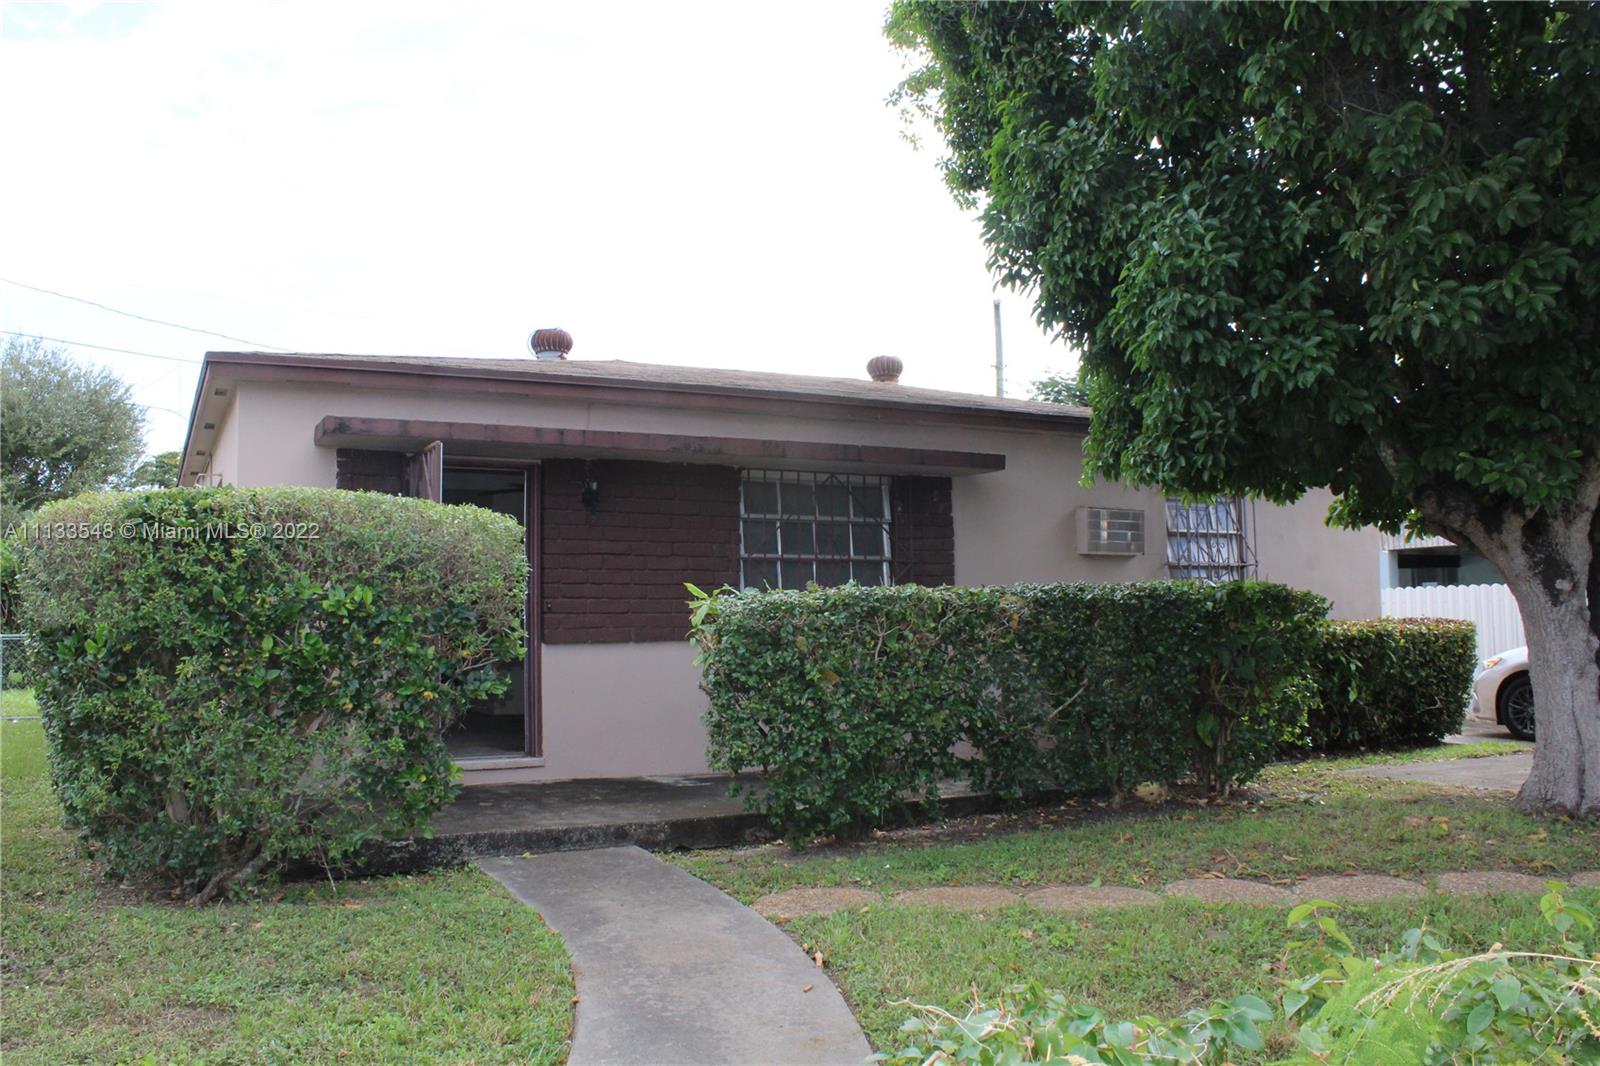 Great location - walk to University of Miami. Close to desirable facilities, including US-1, Metrorail, shops, hospital, and more. Needs major repairs/updating. Would be a great buy for an investor willing to do extensive repairs/updating.